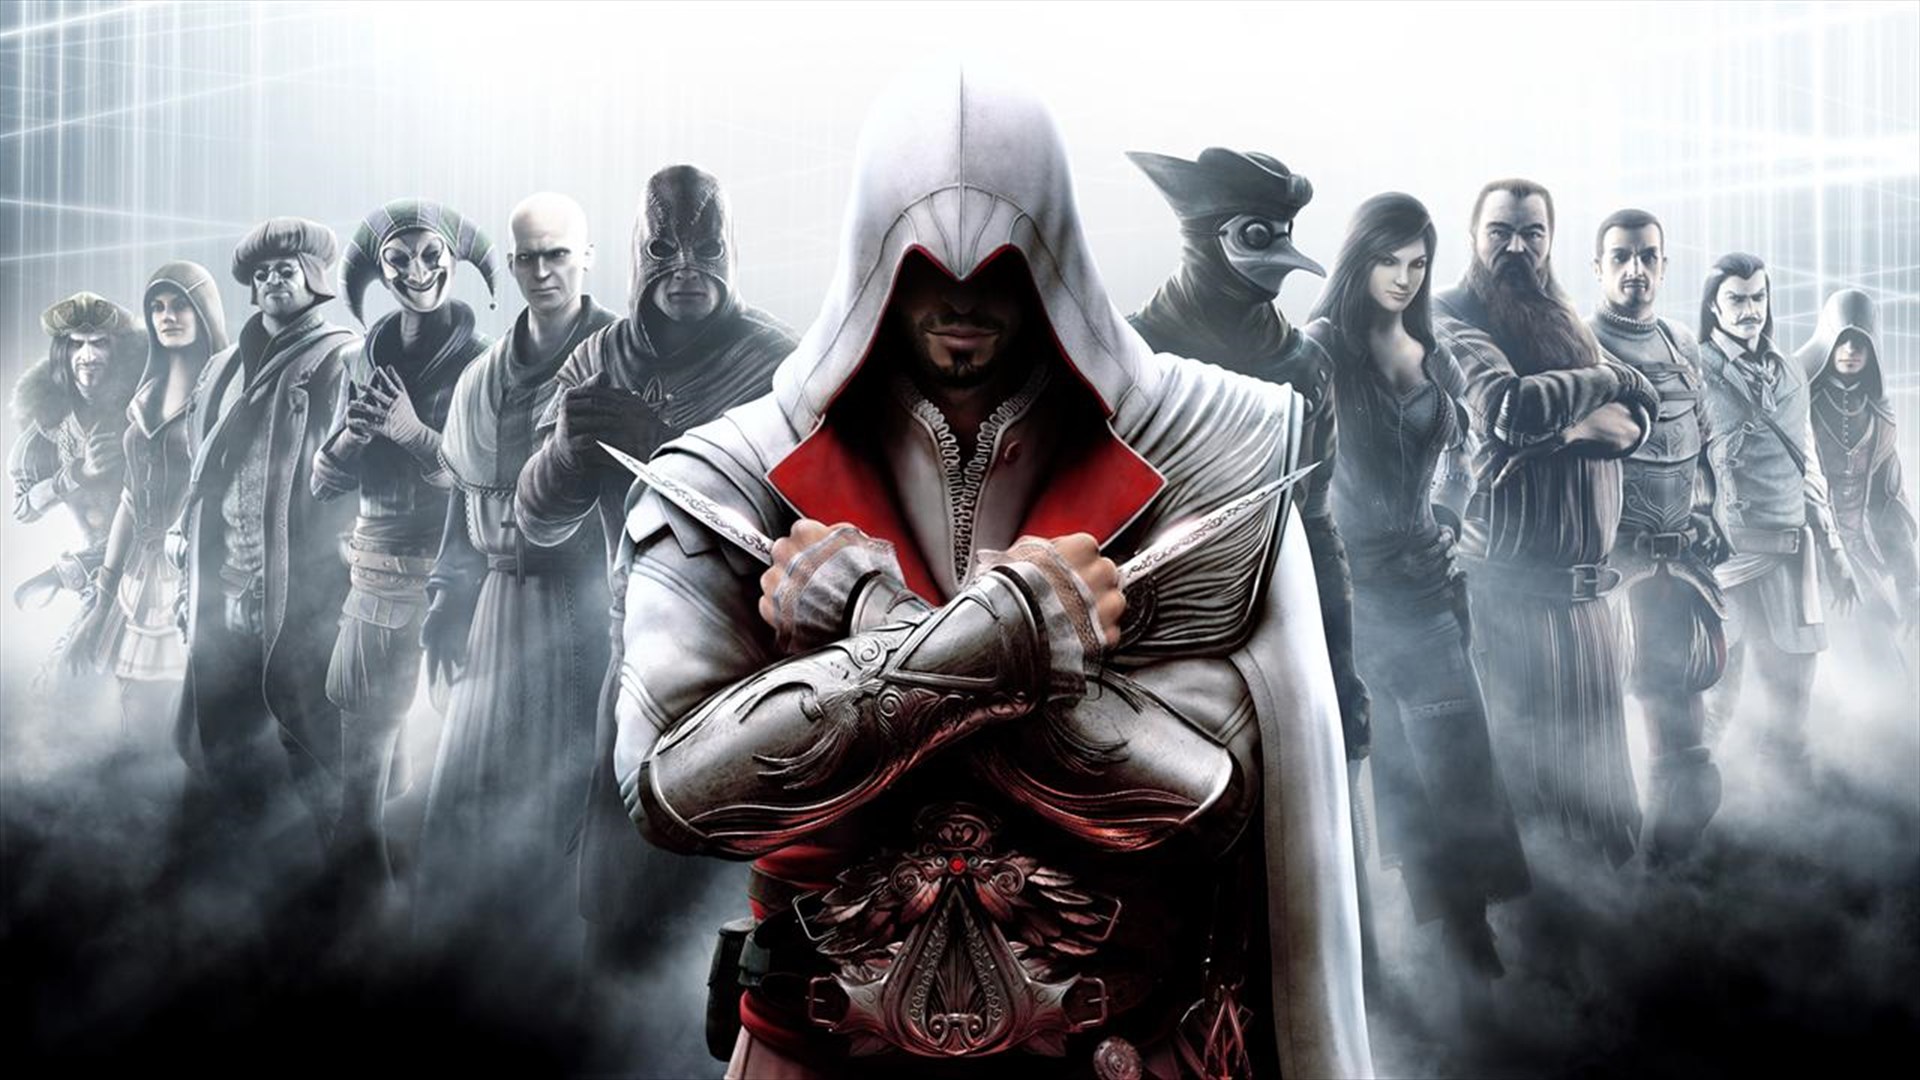 Where to next  Assassins creed, Assassin's creed, Assassins creed